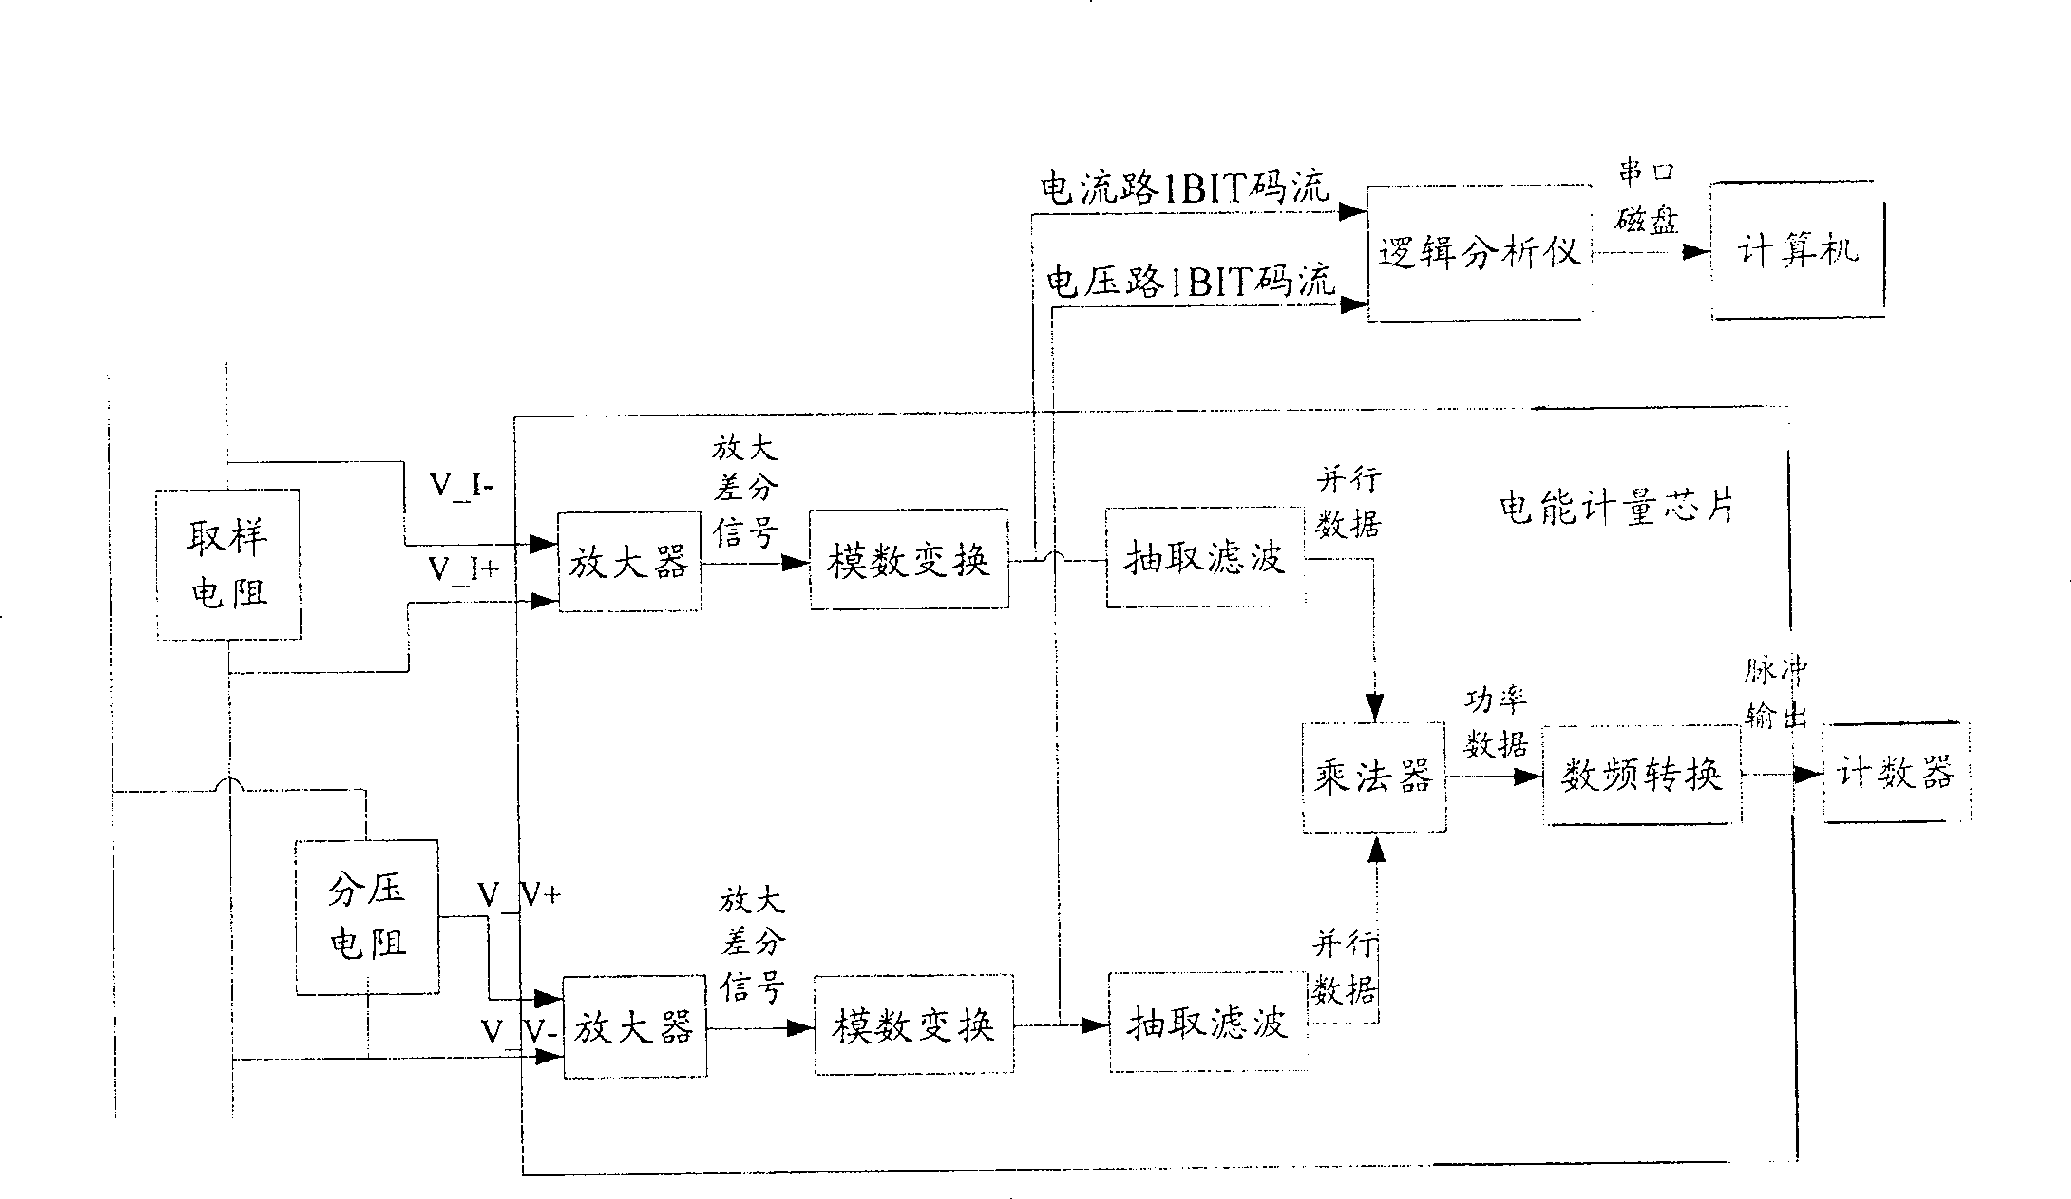 Real time collection storage apparatus used for electric energy computation chip